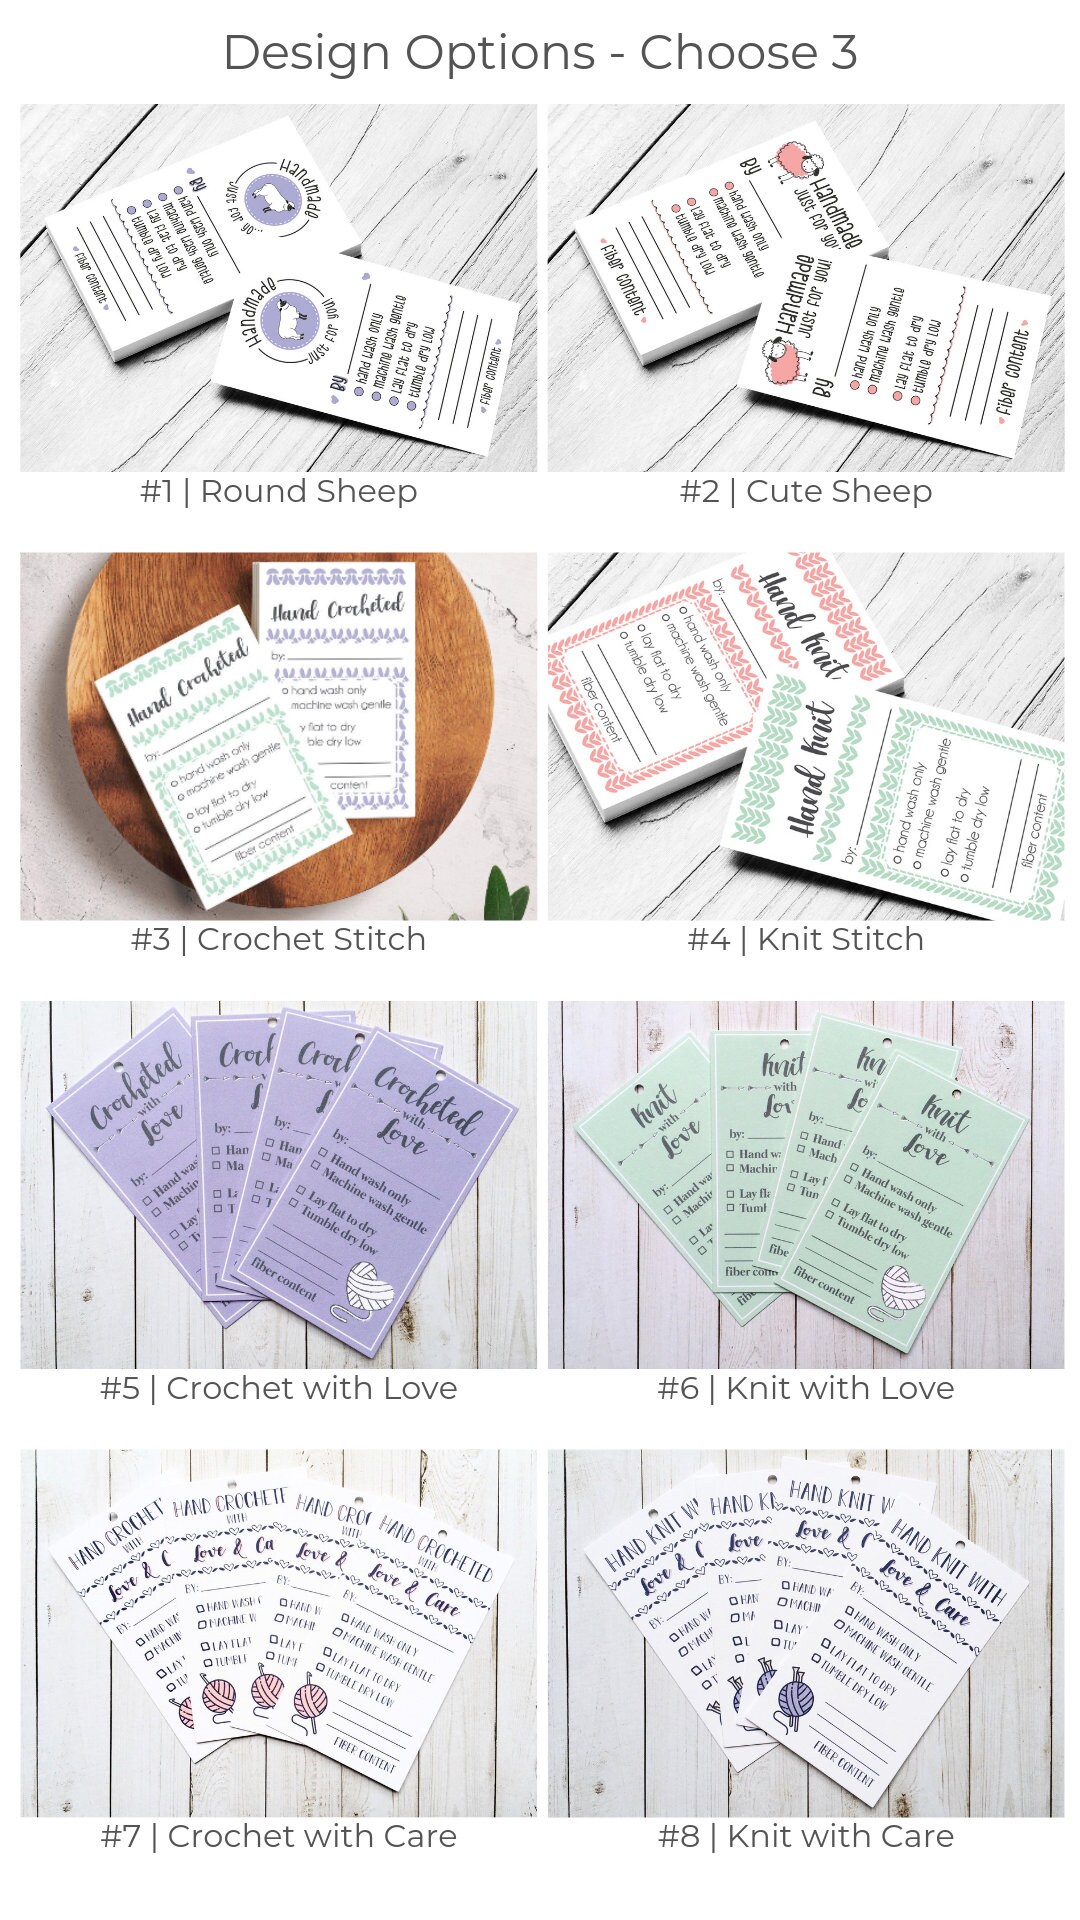 Hand Crochet Care Tags DOWNLOAD Crochet Care Instructions 